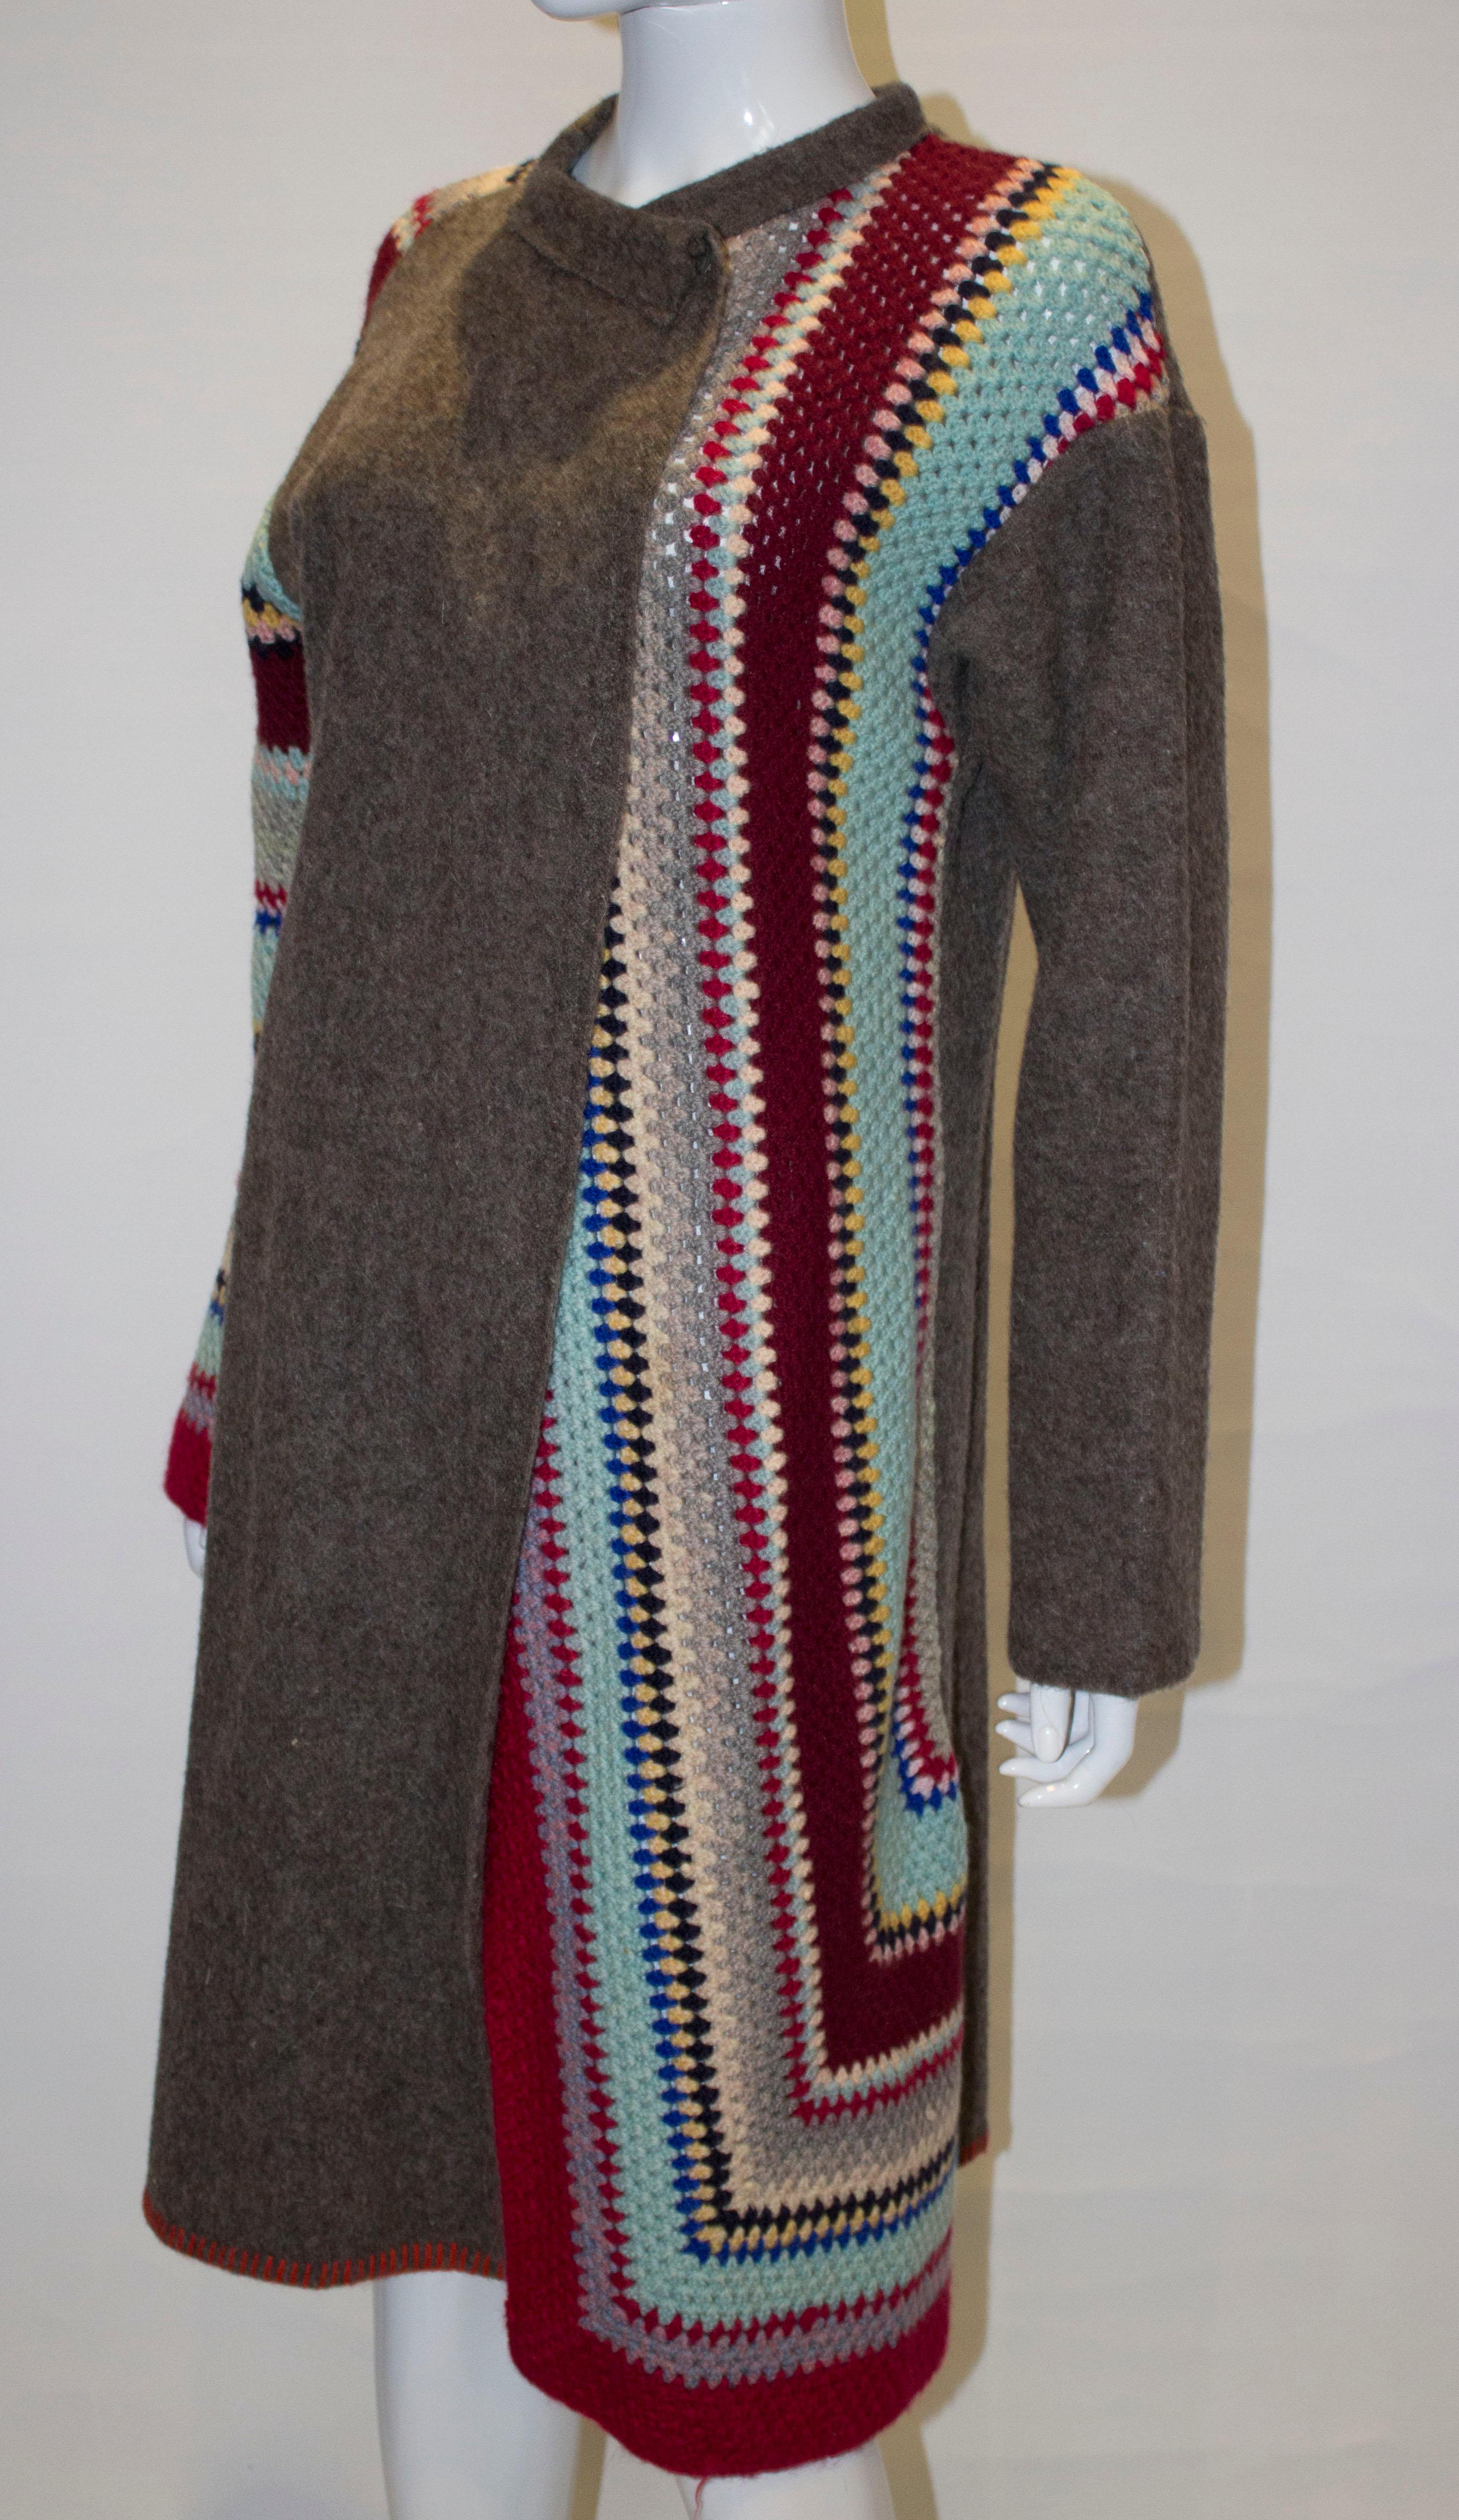  Vintage Crochet and Wool Long Jacket In Good Condition For Sale In London, GB